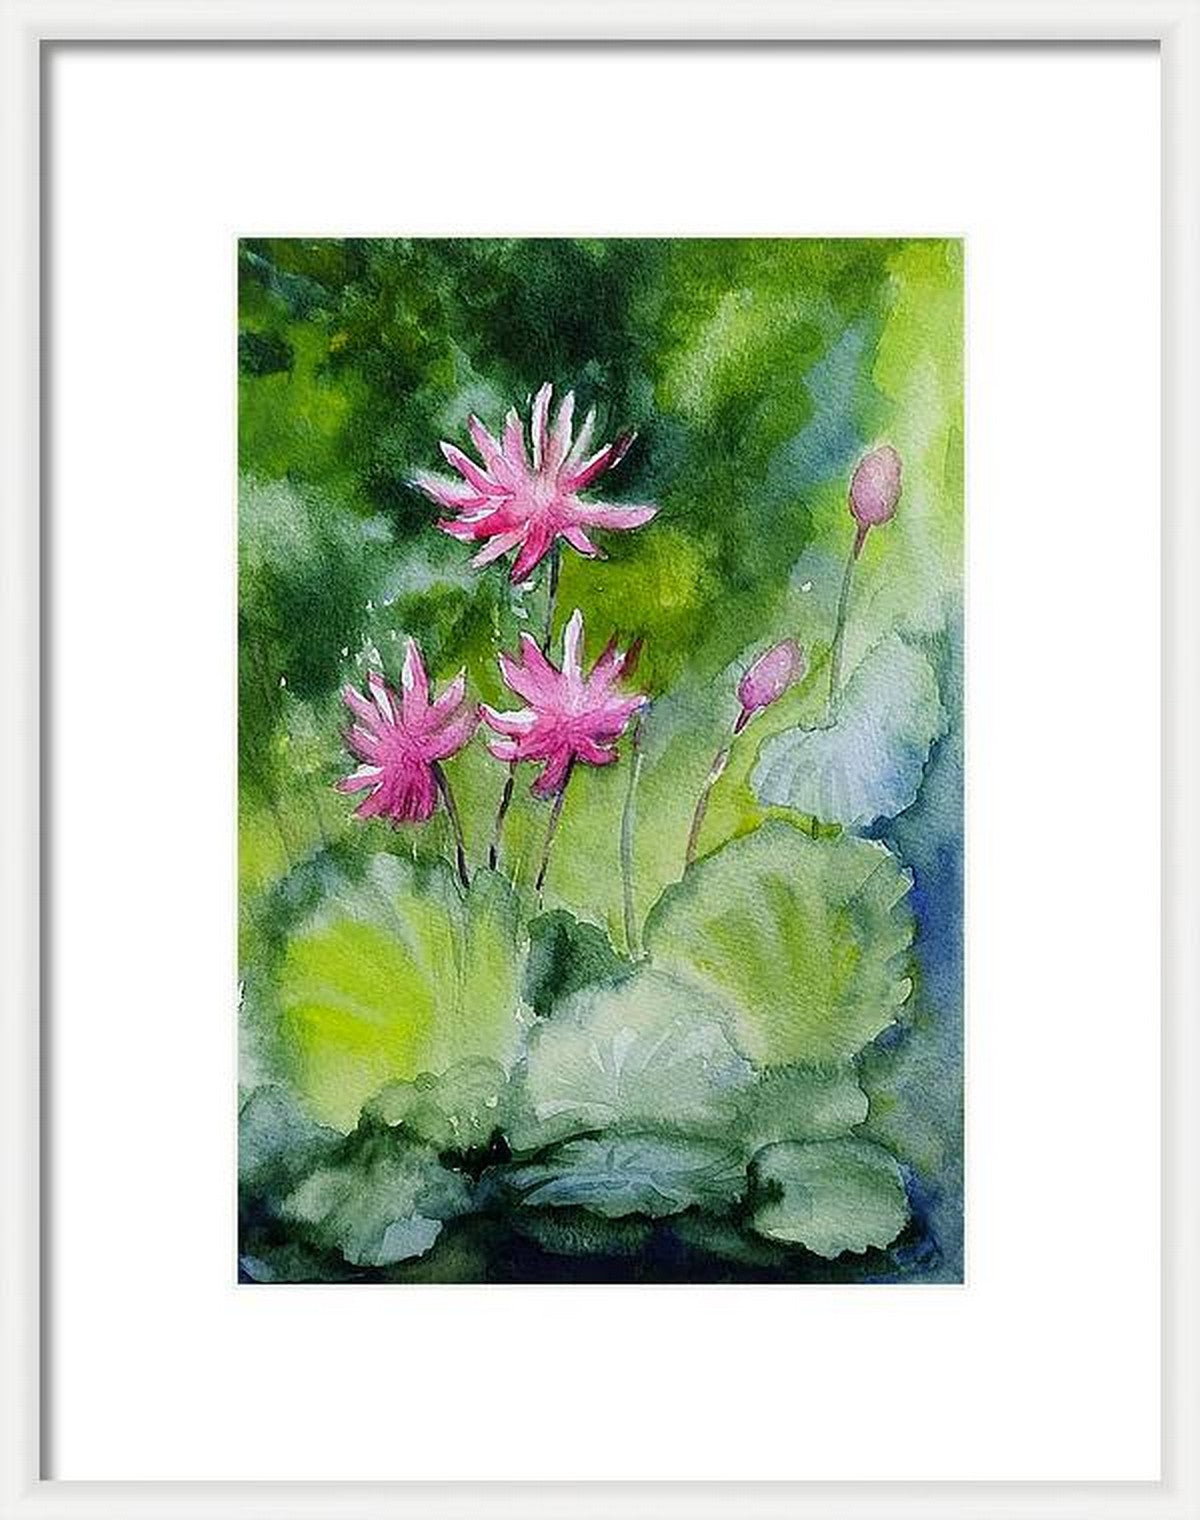 In a virtual frame, Pink water lilies, watercolor painting